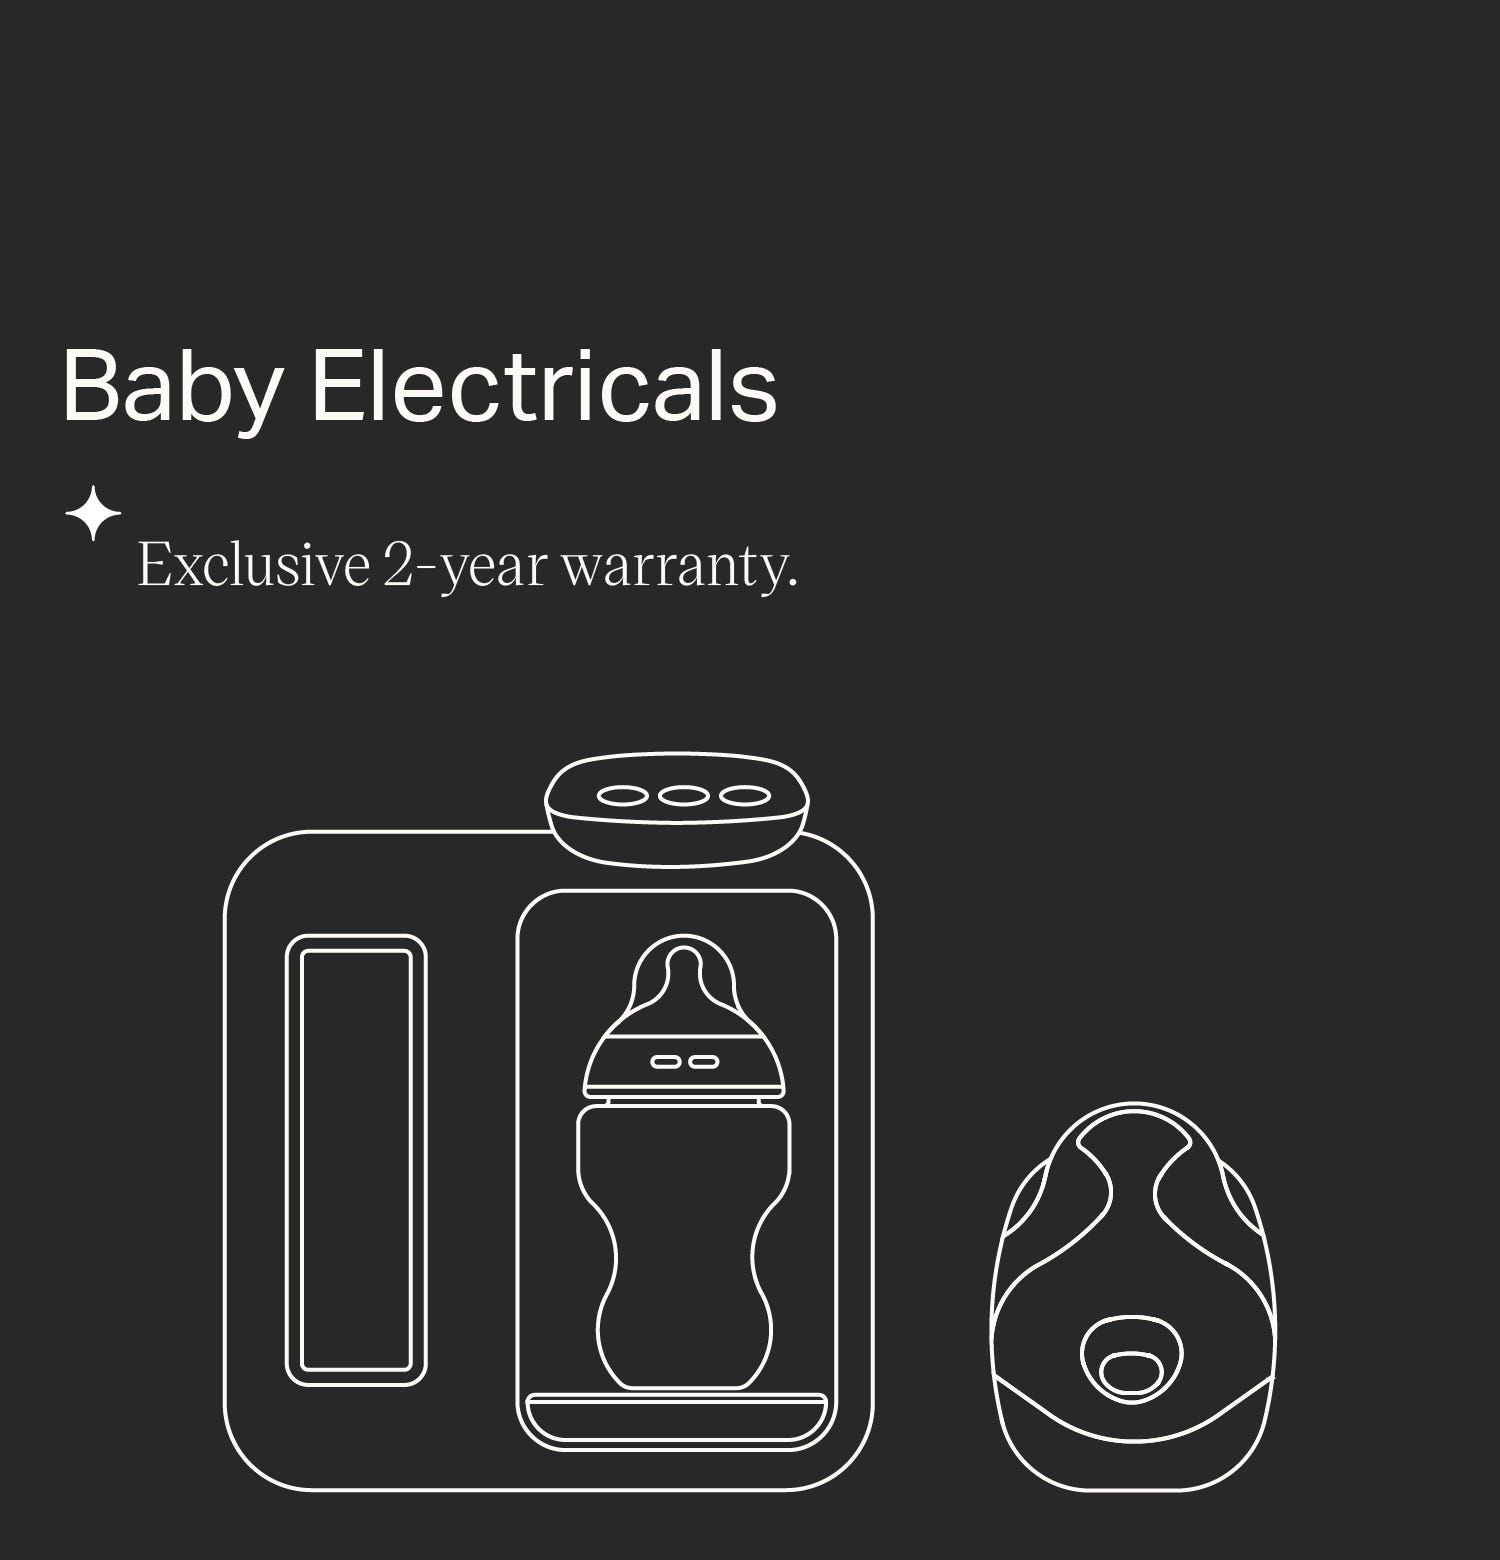 Baby Electricals